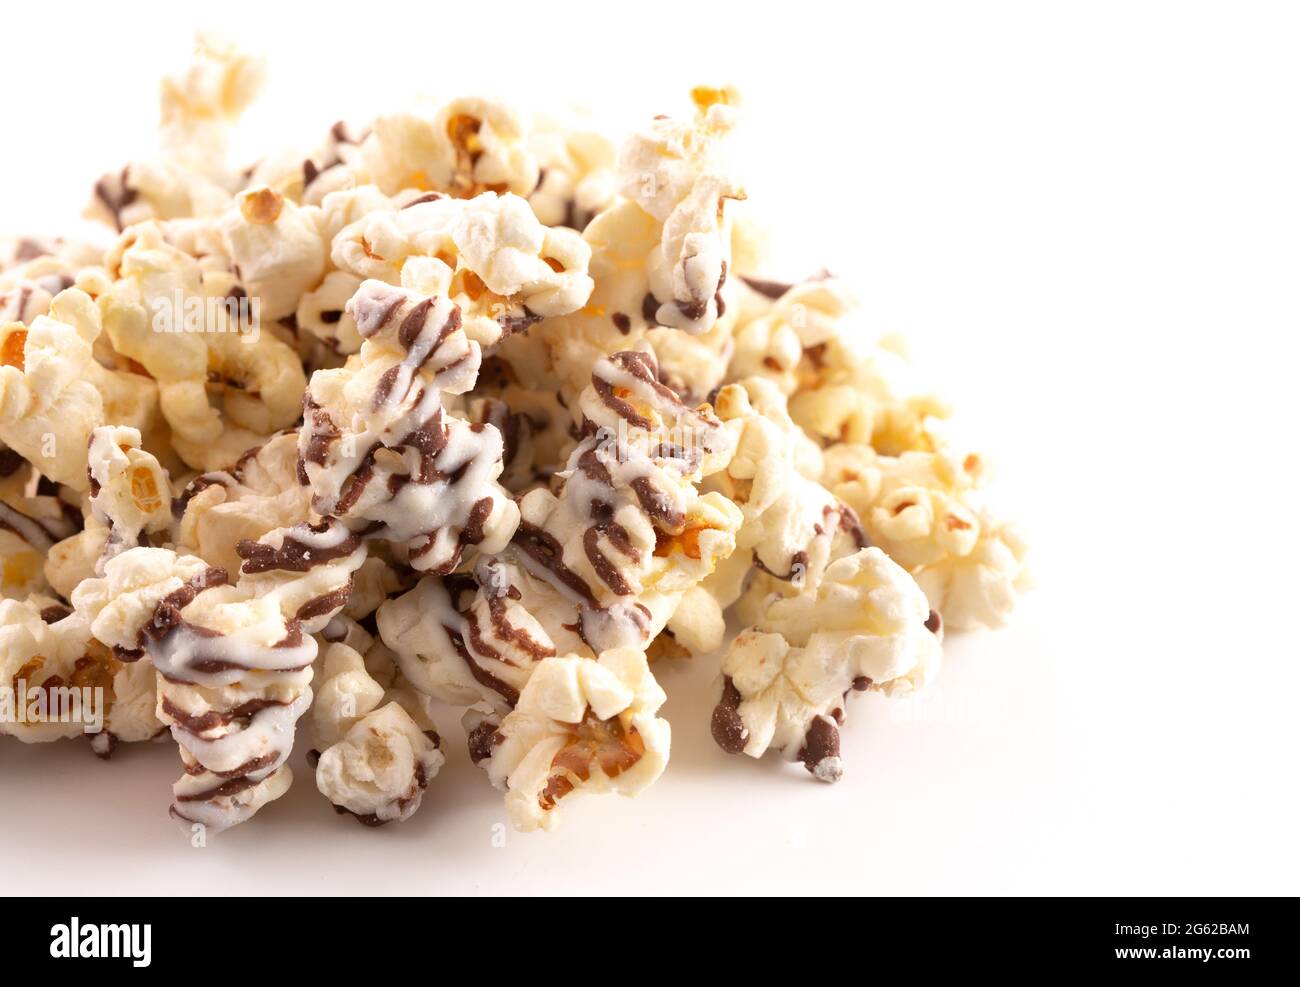 A Pile of White and Milk Chocolate Drizzled Sweet Popcorn Stock Photo